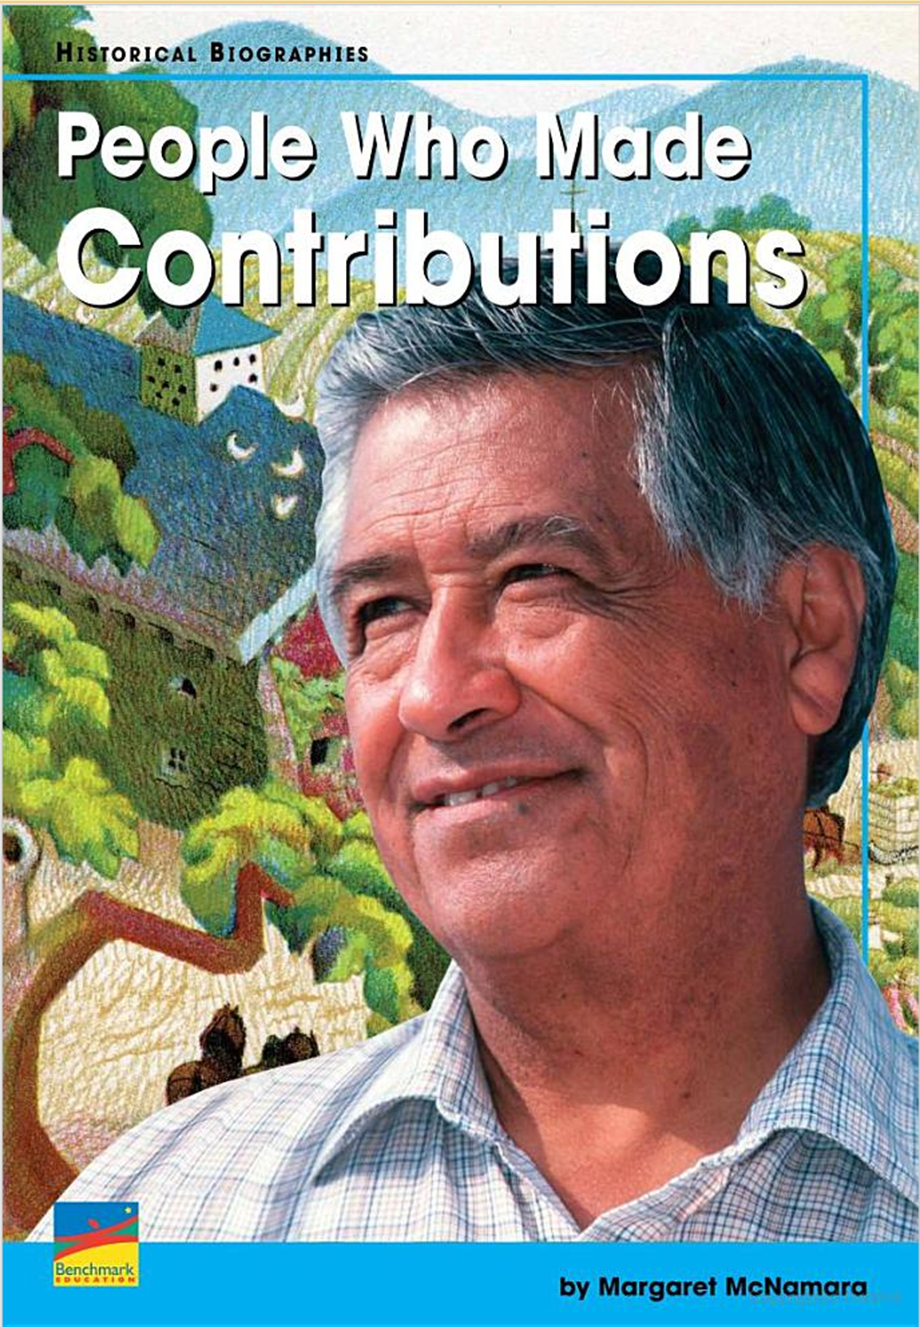 People Who Made Contributions